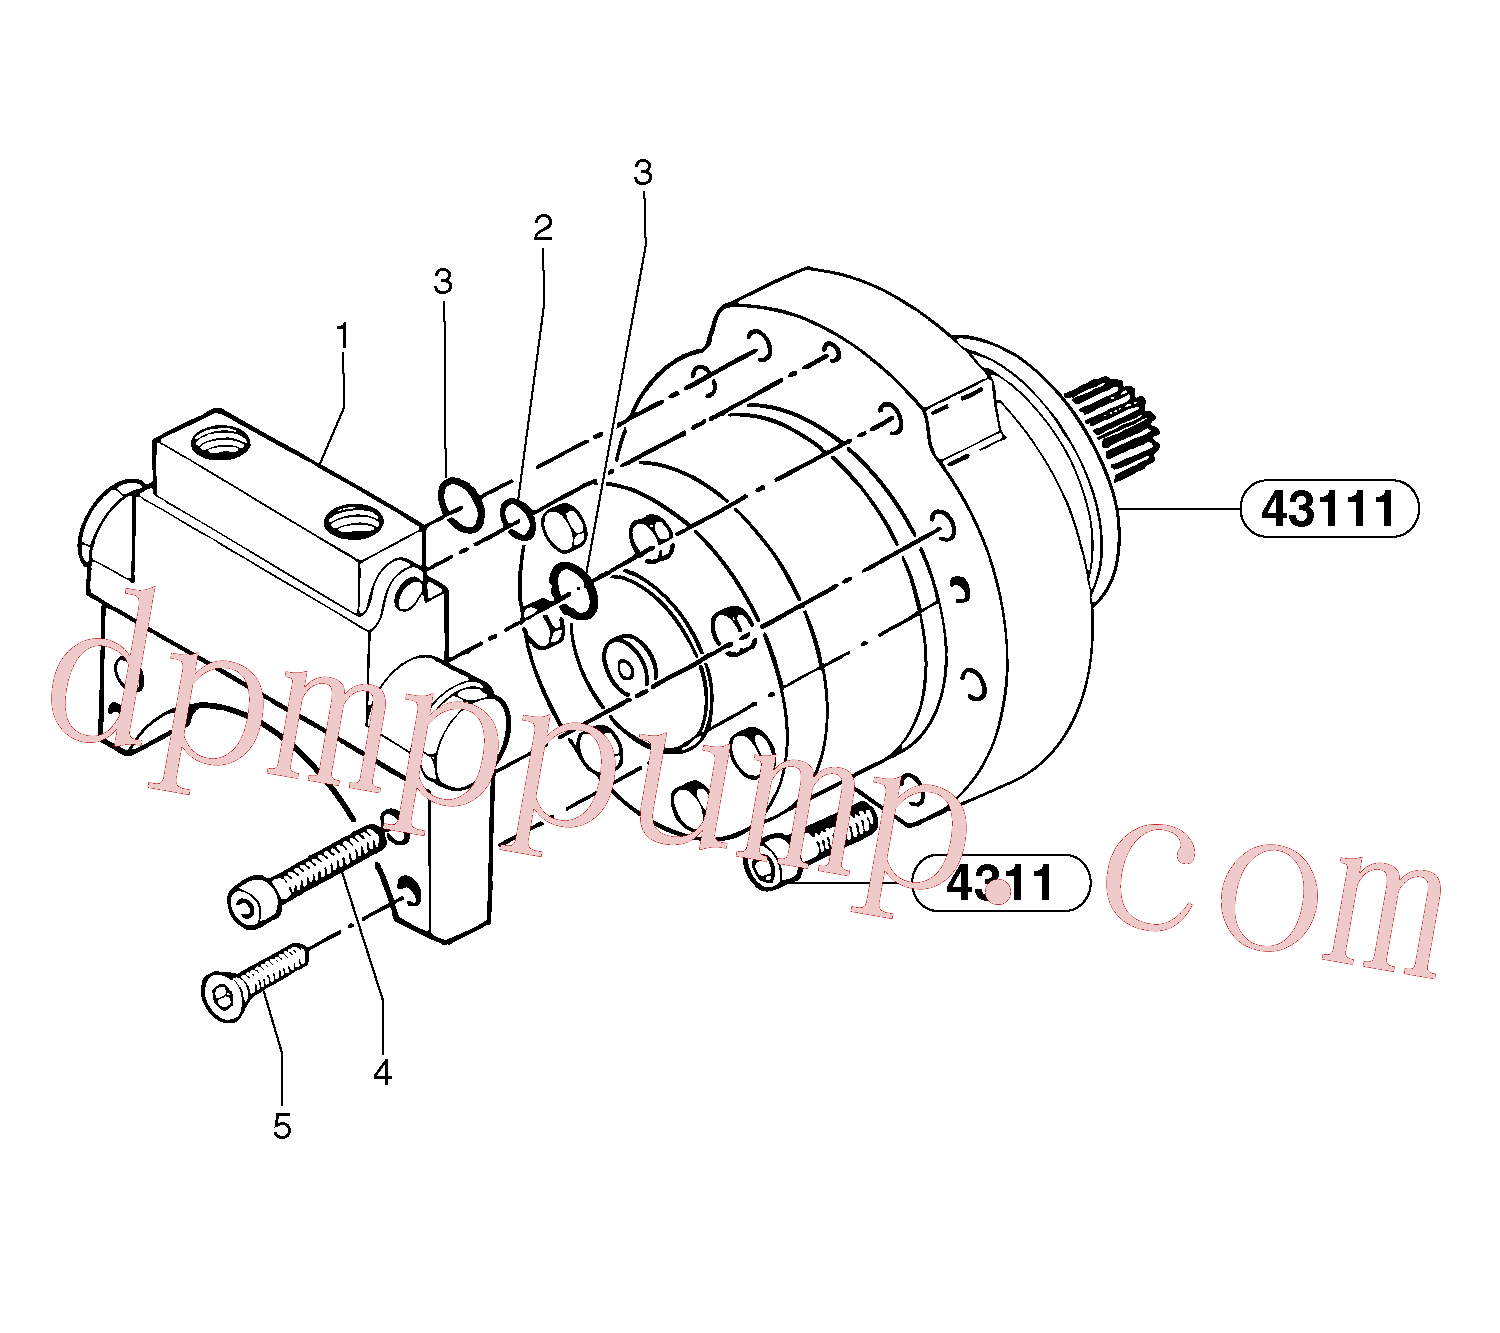 PJ7415957 for Volvo Balancing valve ( travelling )(43113X1 assembly)